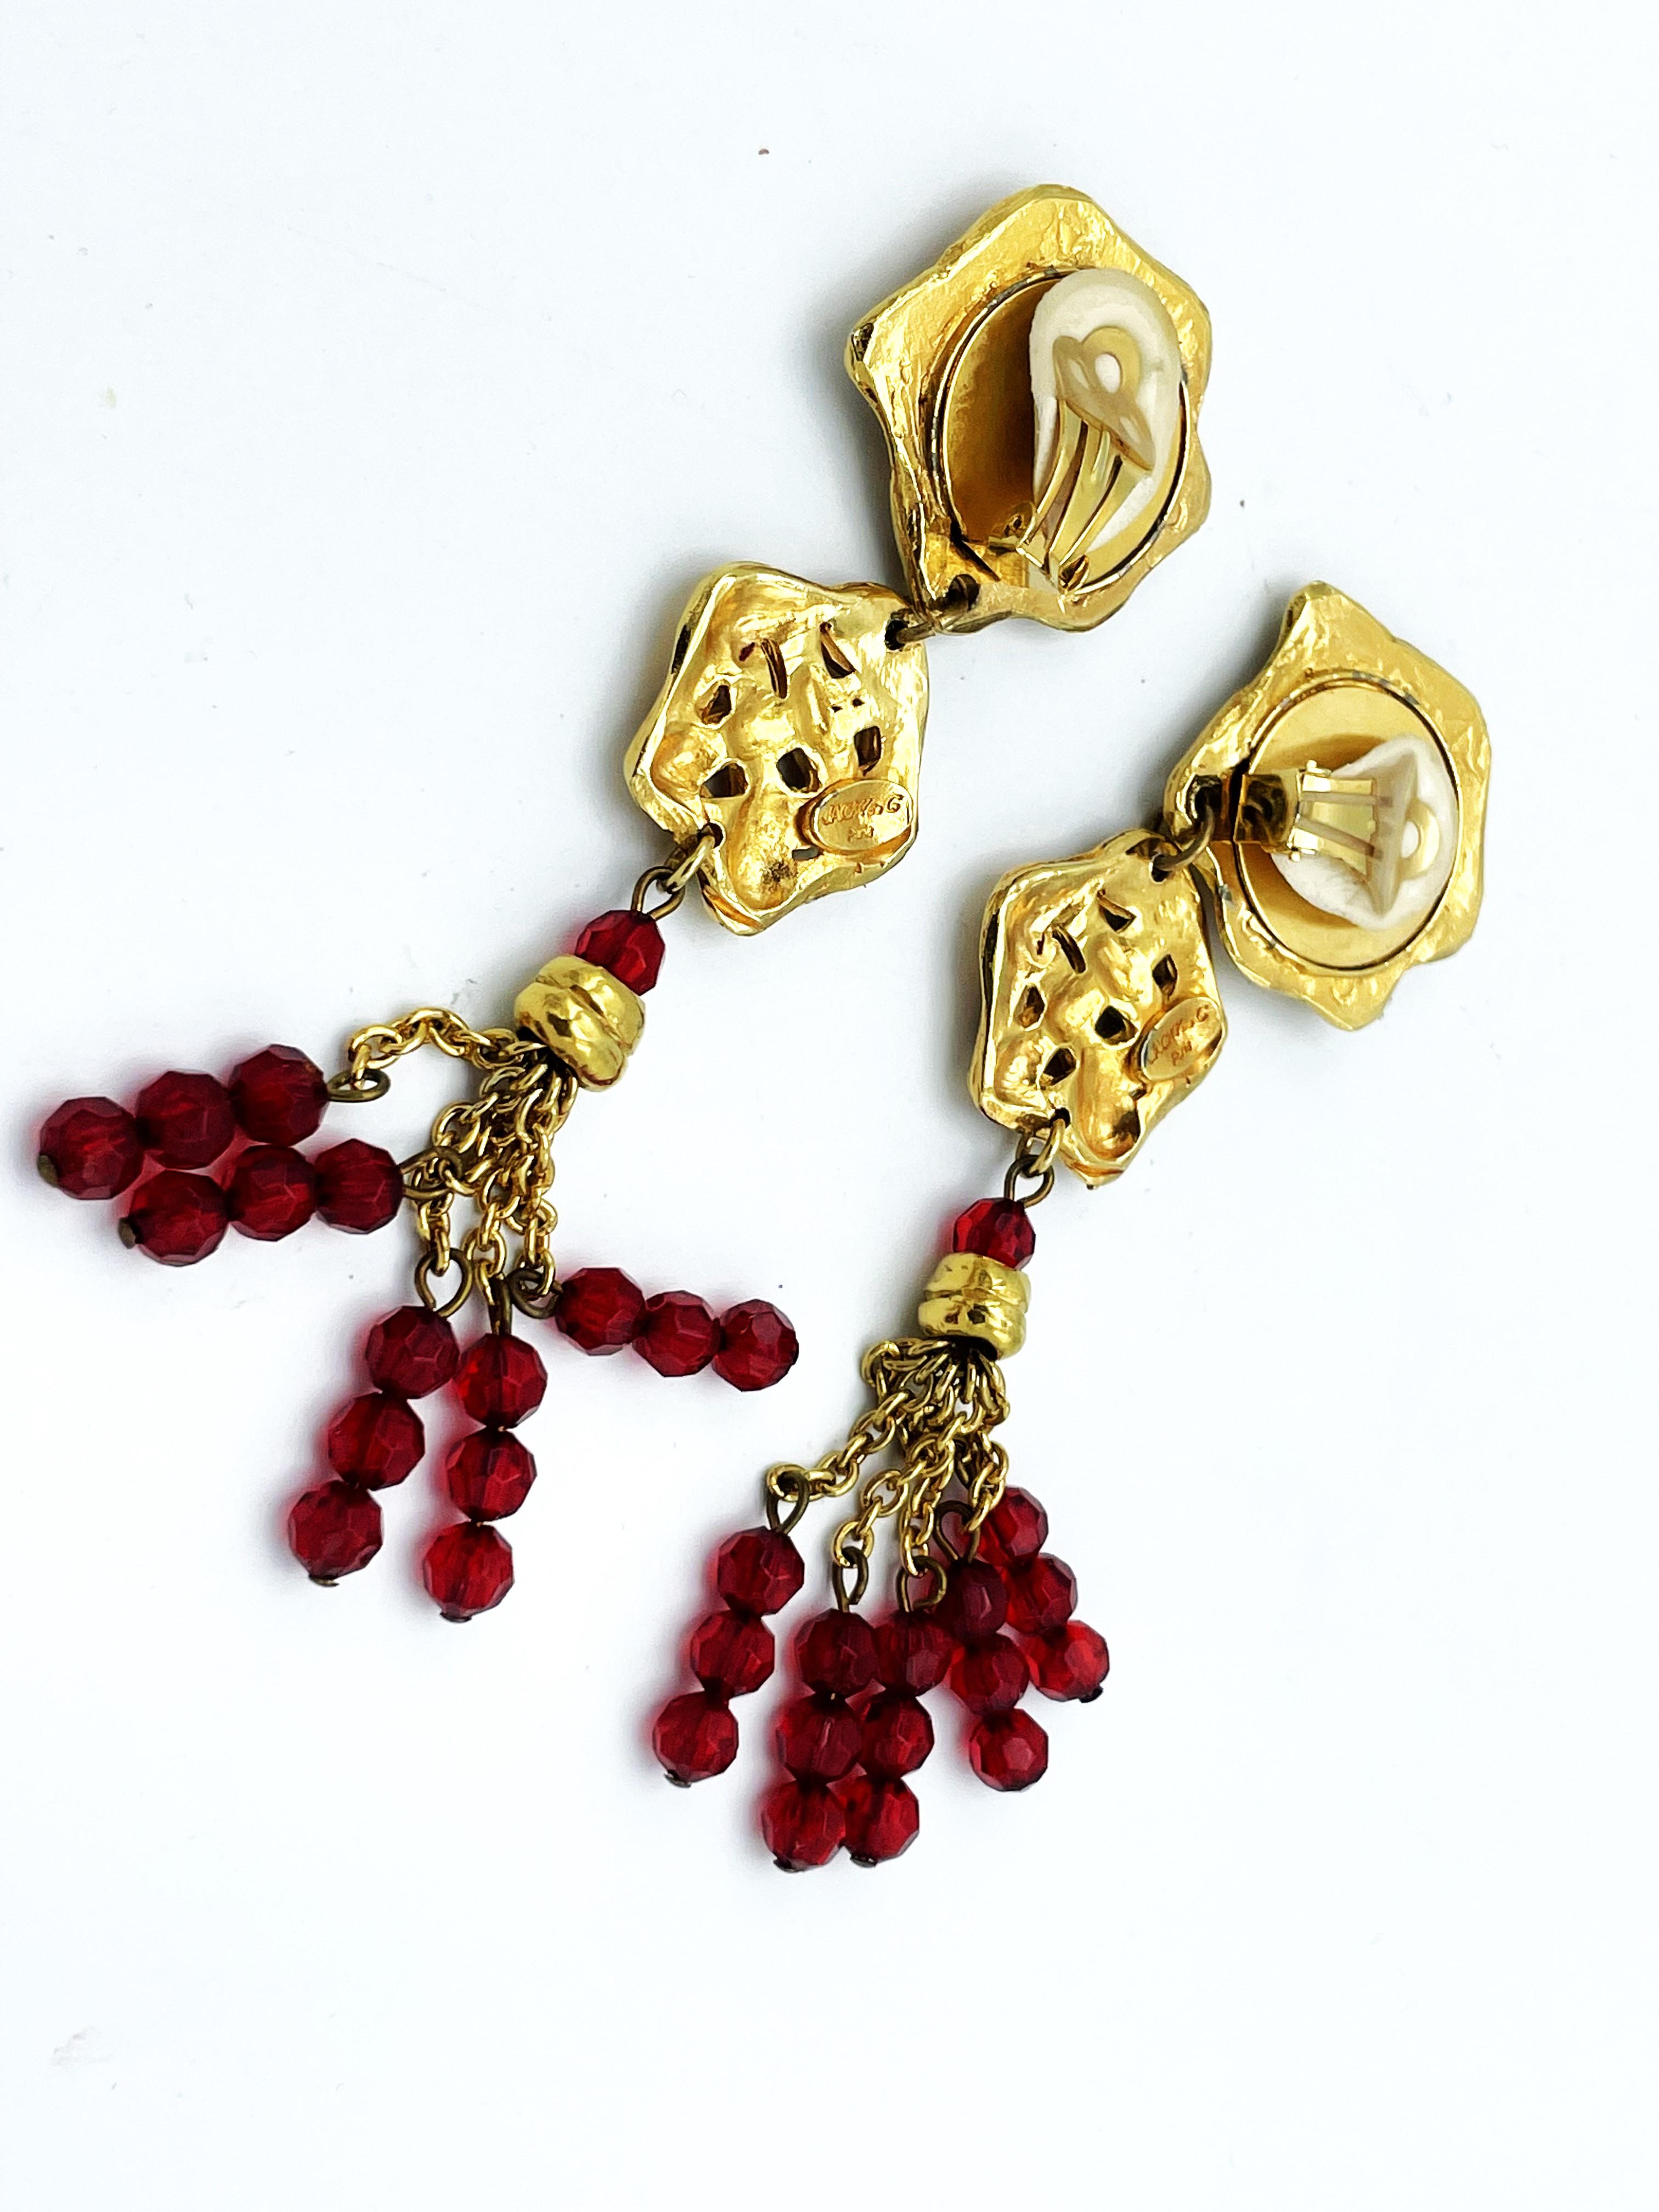 Long Clip-one earing by JACKY de G Paris, gold plated, red rhinestons For Sale 4